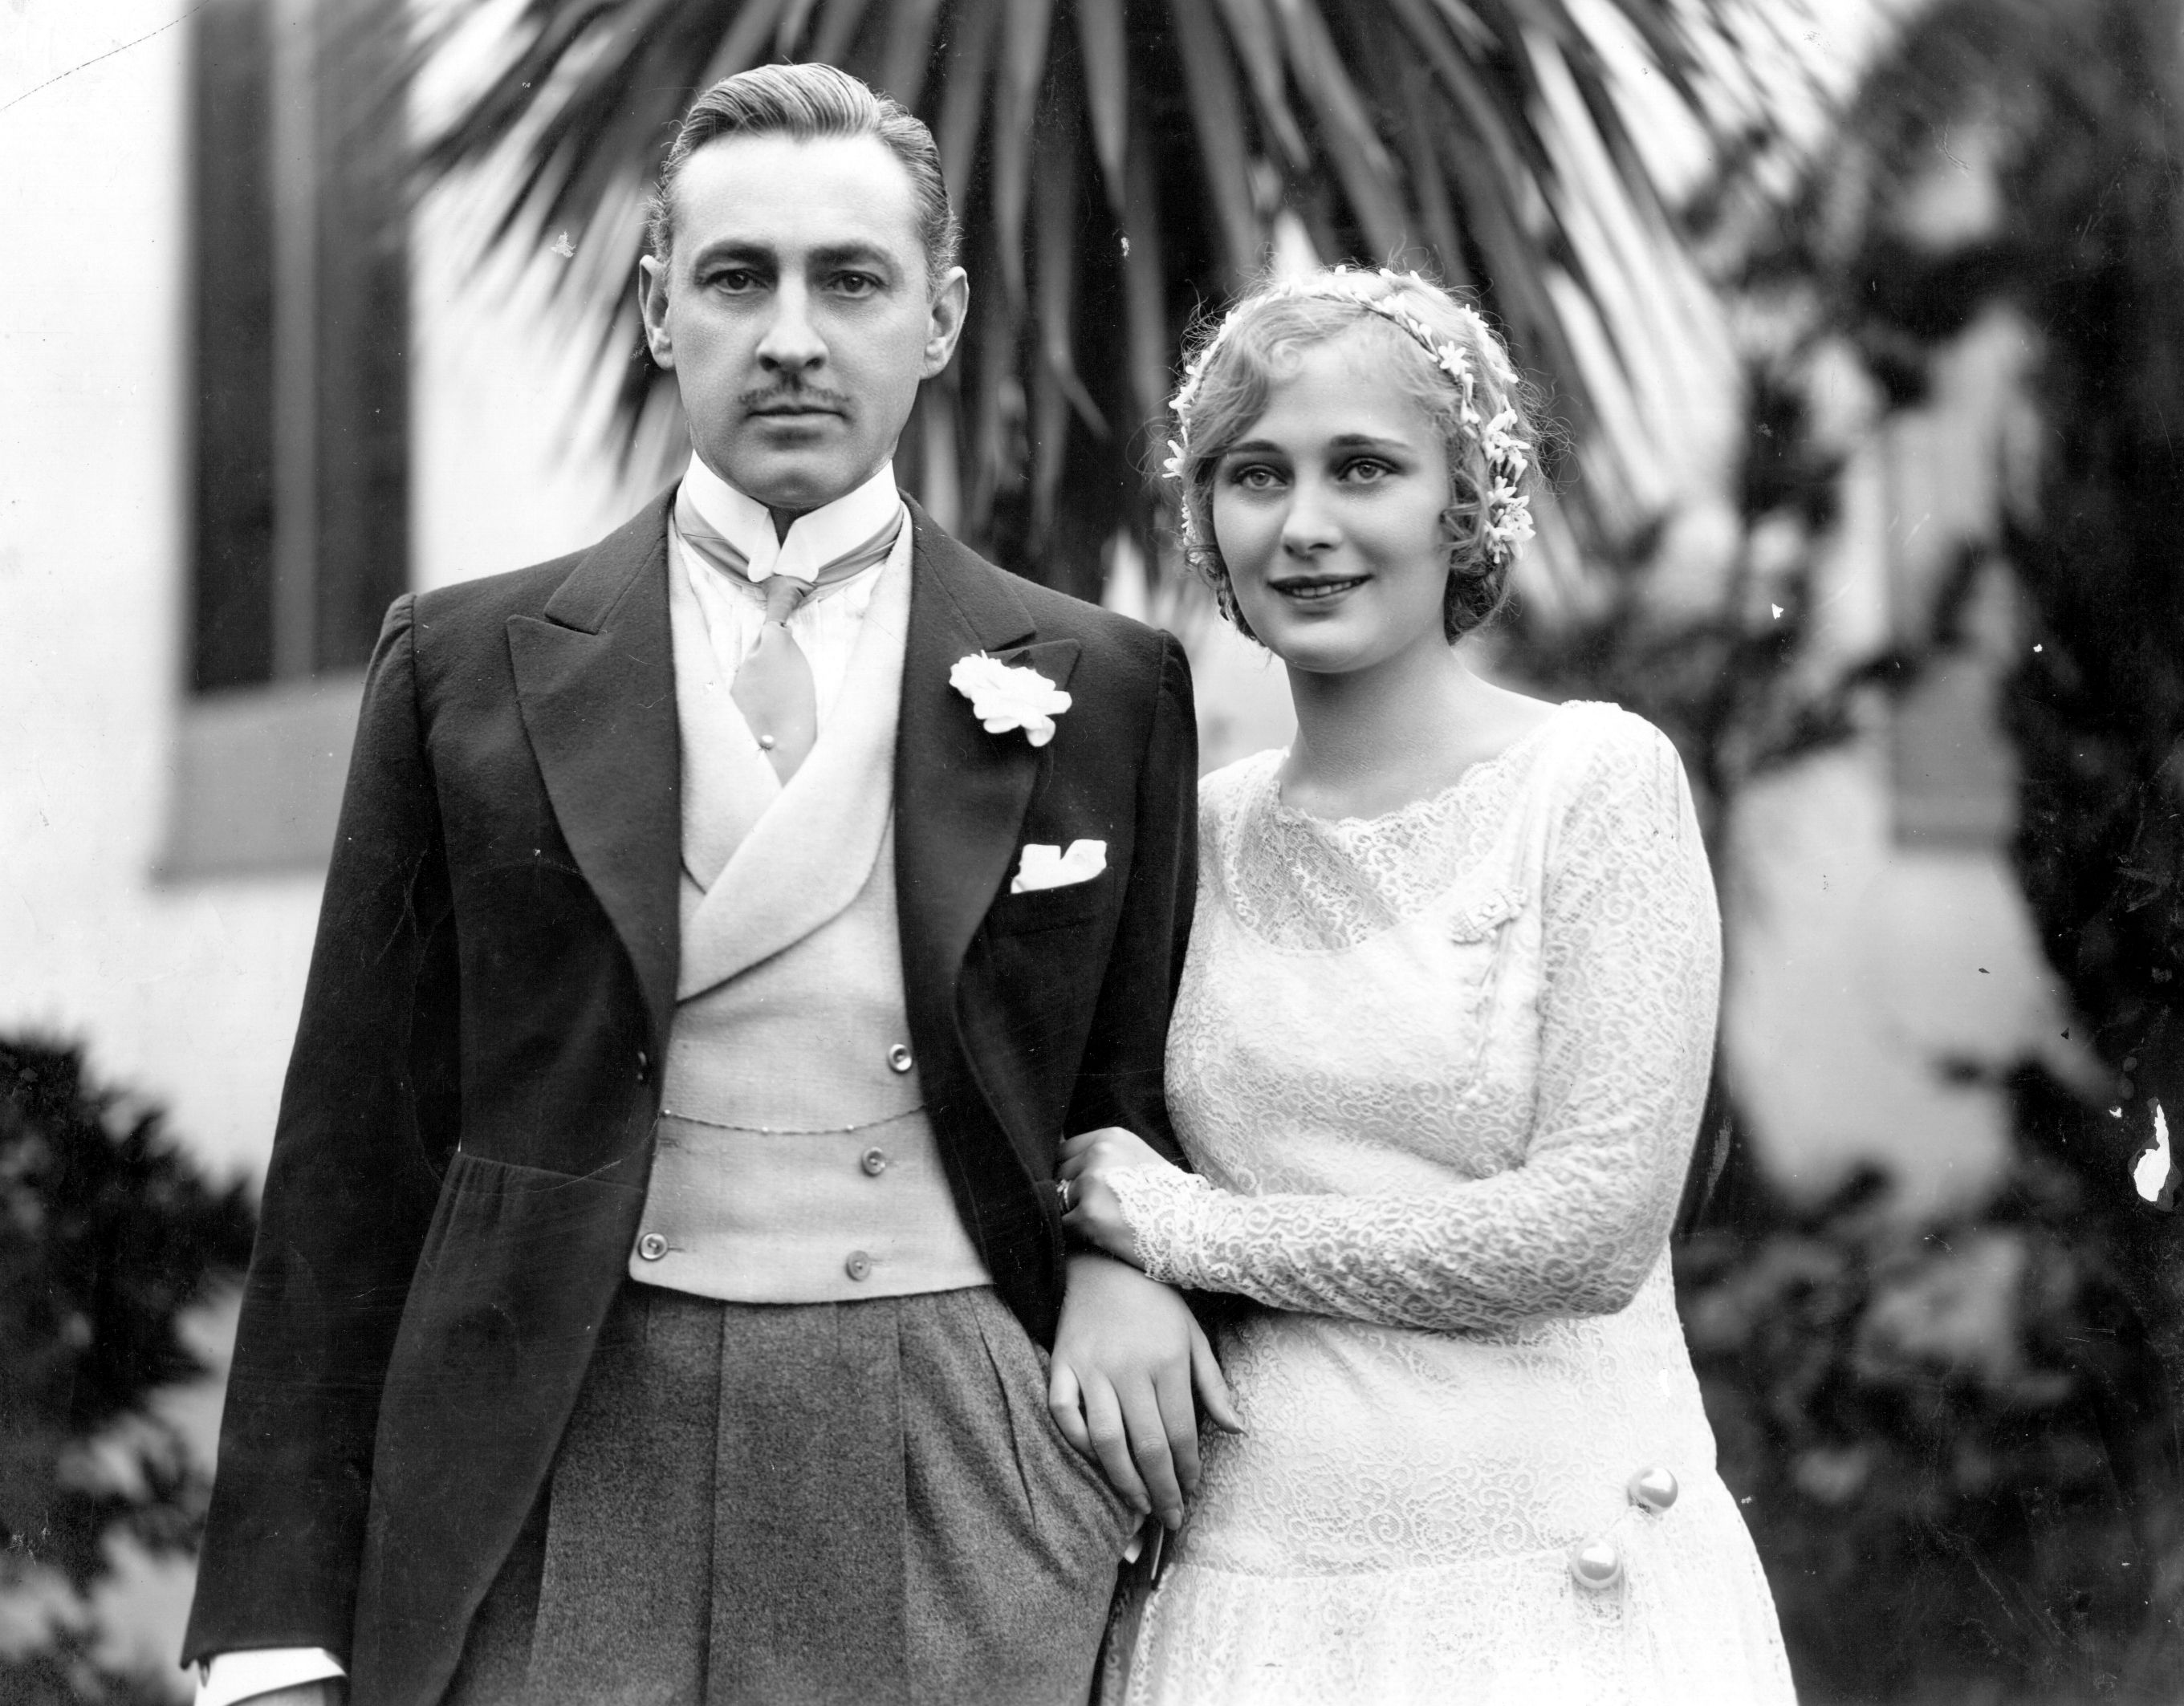 John Barrymore and Dolores Costello on their wedding day in 1928 | Source: Getty Images